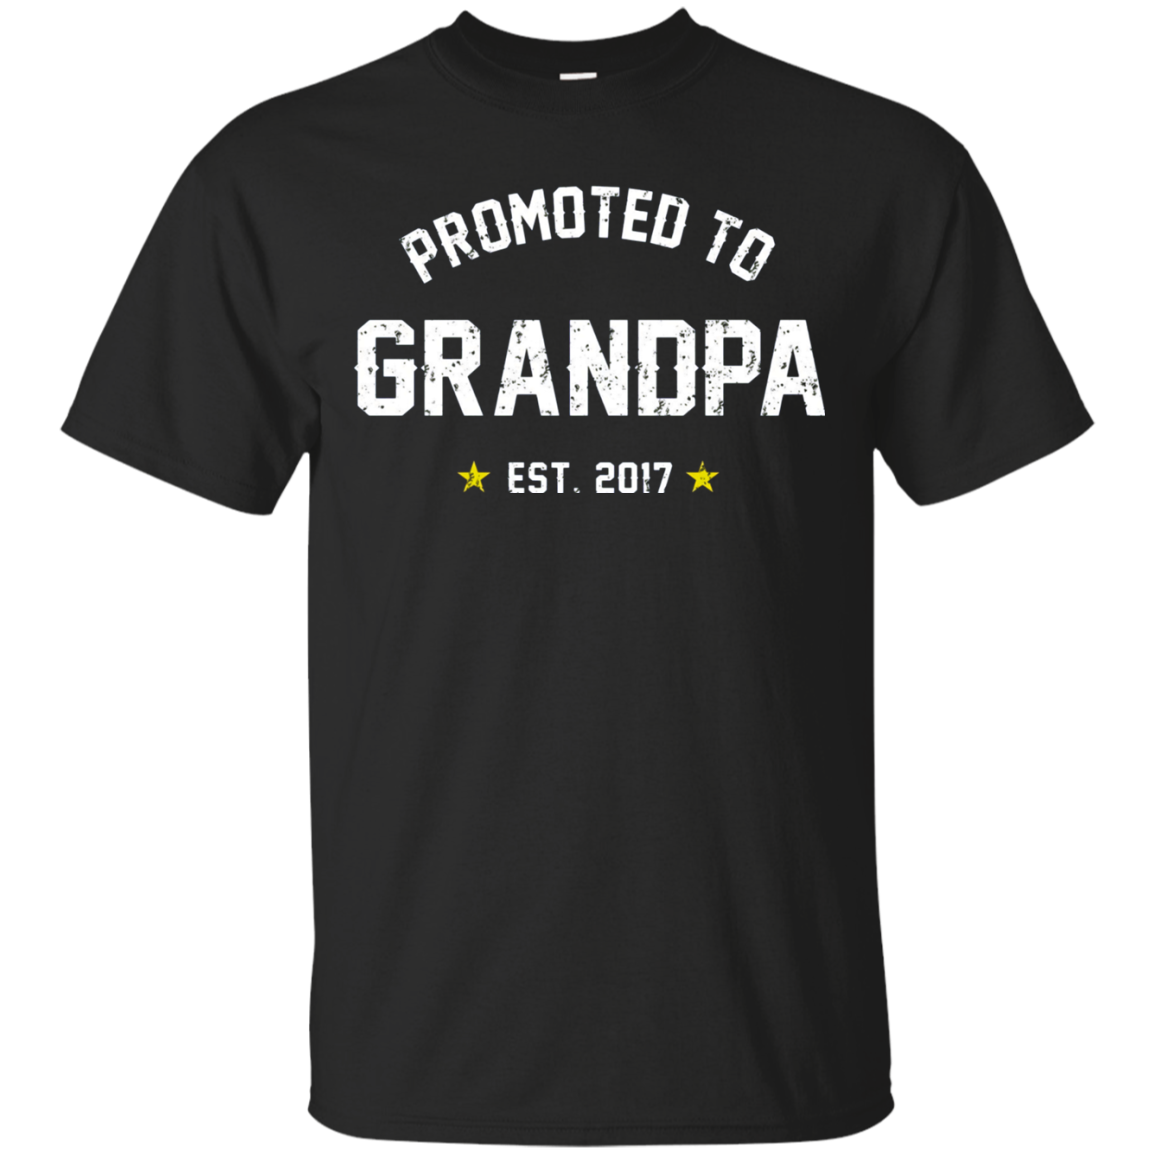 Mens Promoted To Grandpa Shirt Gift For New Grandpa Est 2017 11 - Amyna